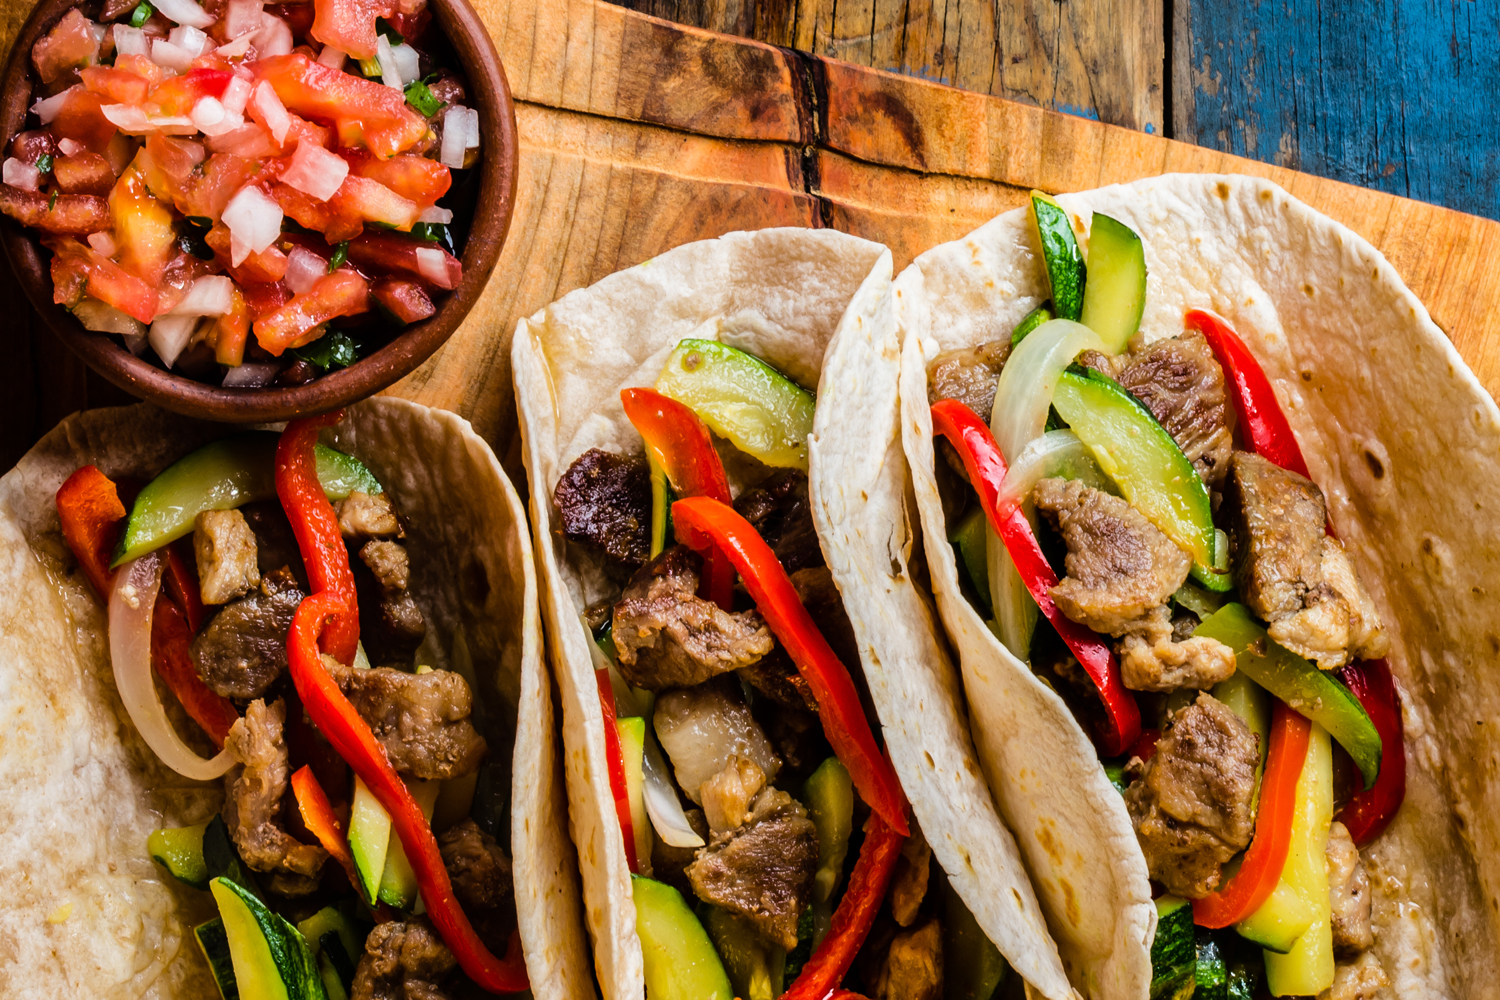 Cooper’s in Abu Dhabi is hosting a free taco eating challenge all month